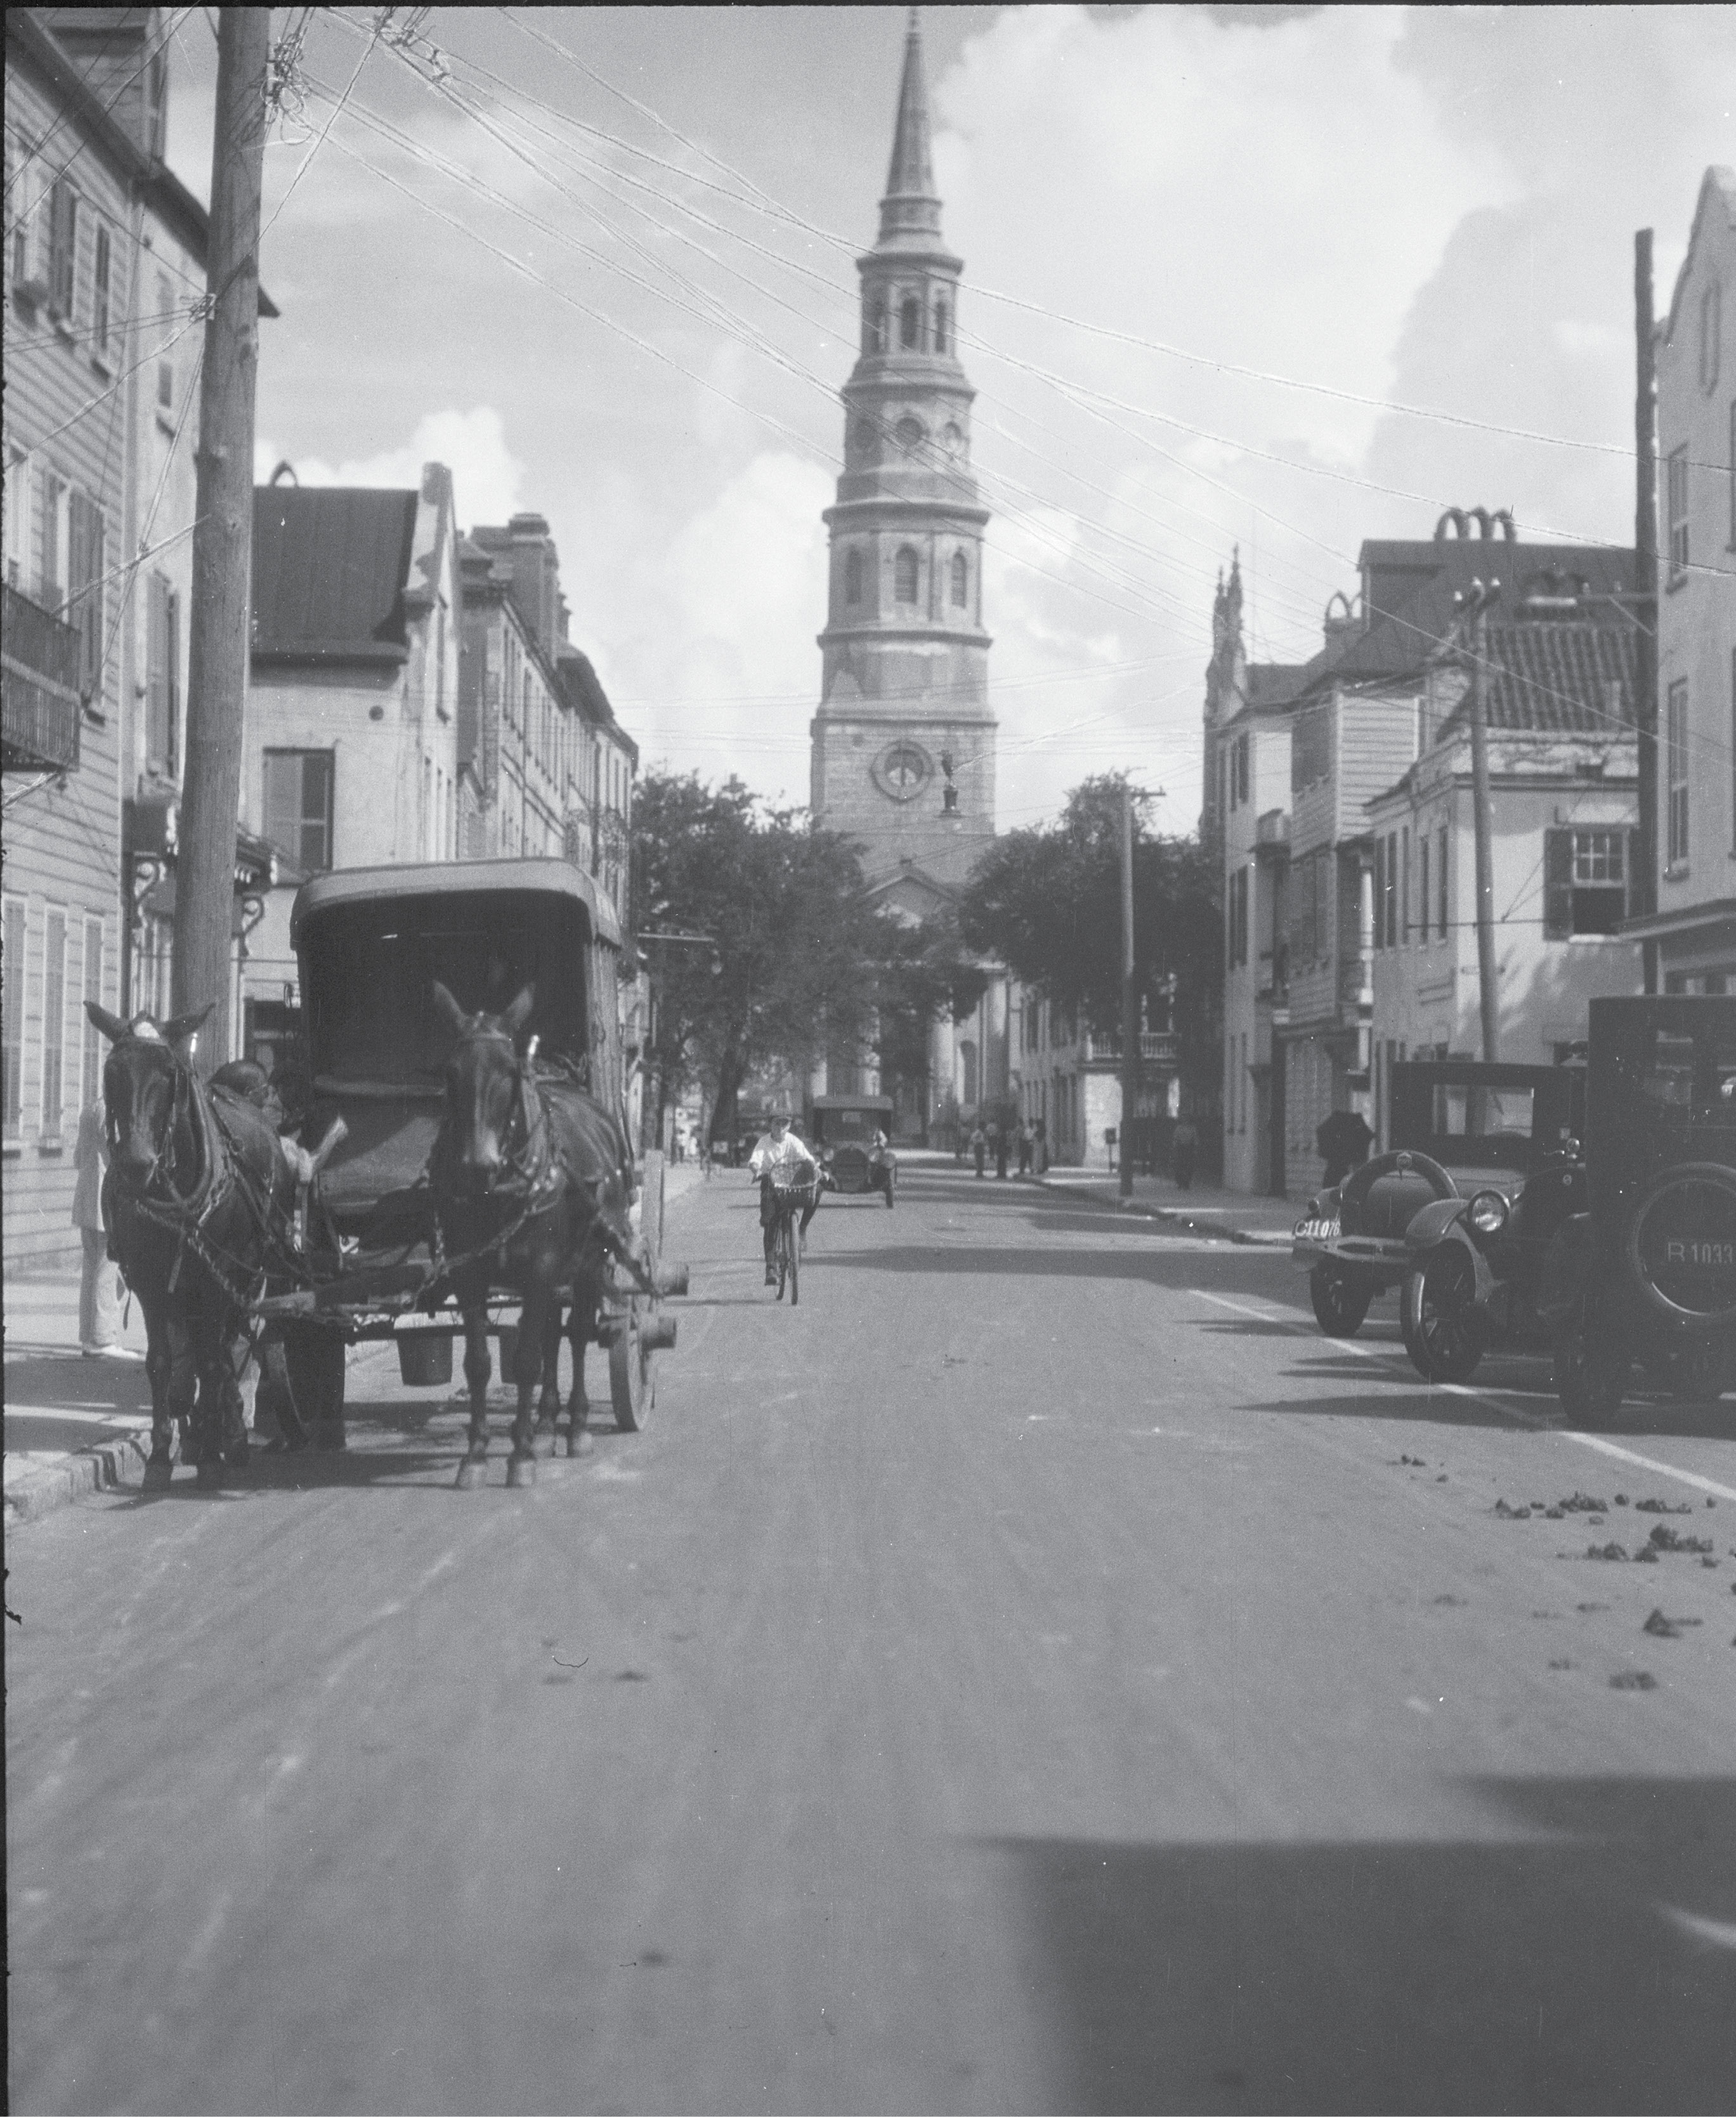 View looking north down Church Street to St. Philip’s Church, circa 1920s, by German photographer Arnold Genthe